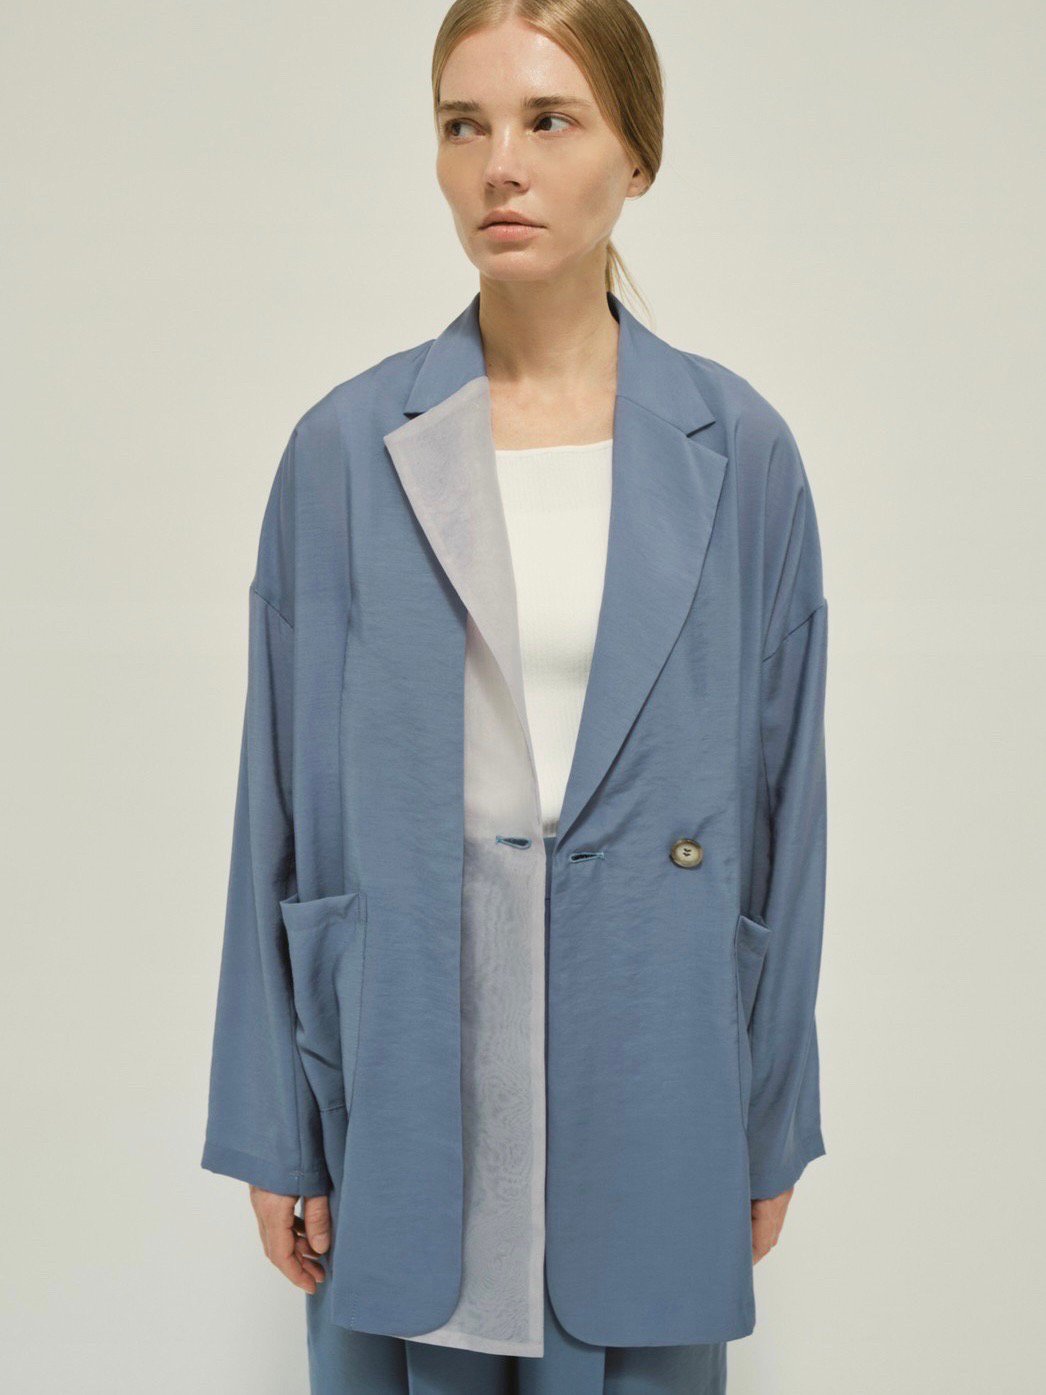 Organdy tailored jacket / blue